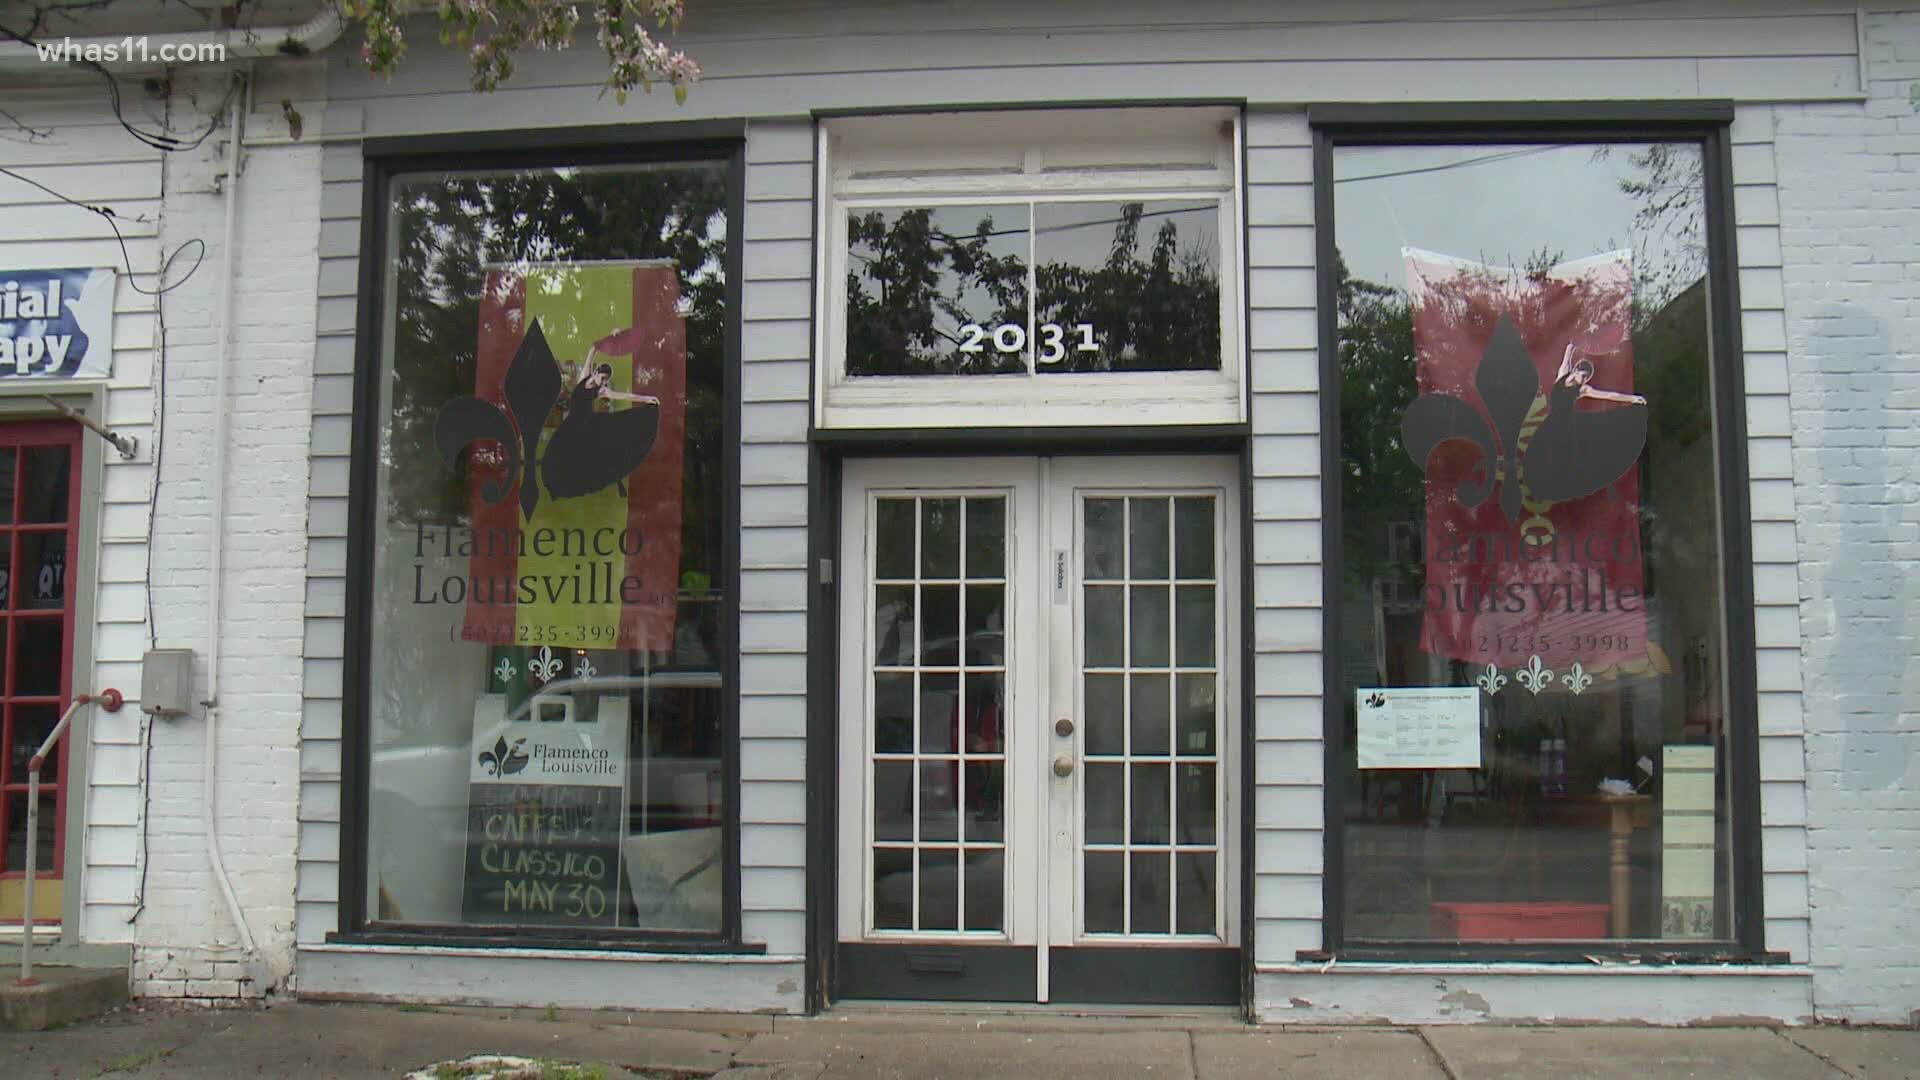 Louisville businesses were forced to close for 2 months due to Covid-19.